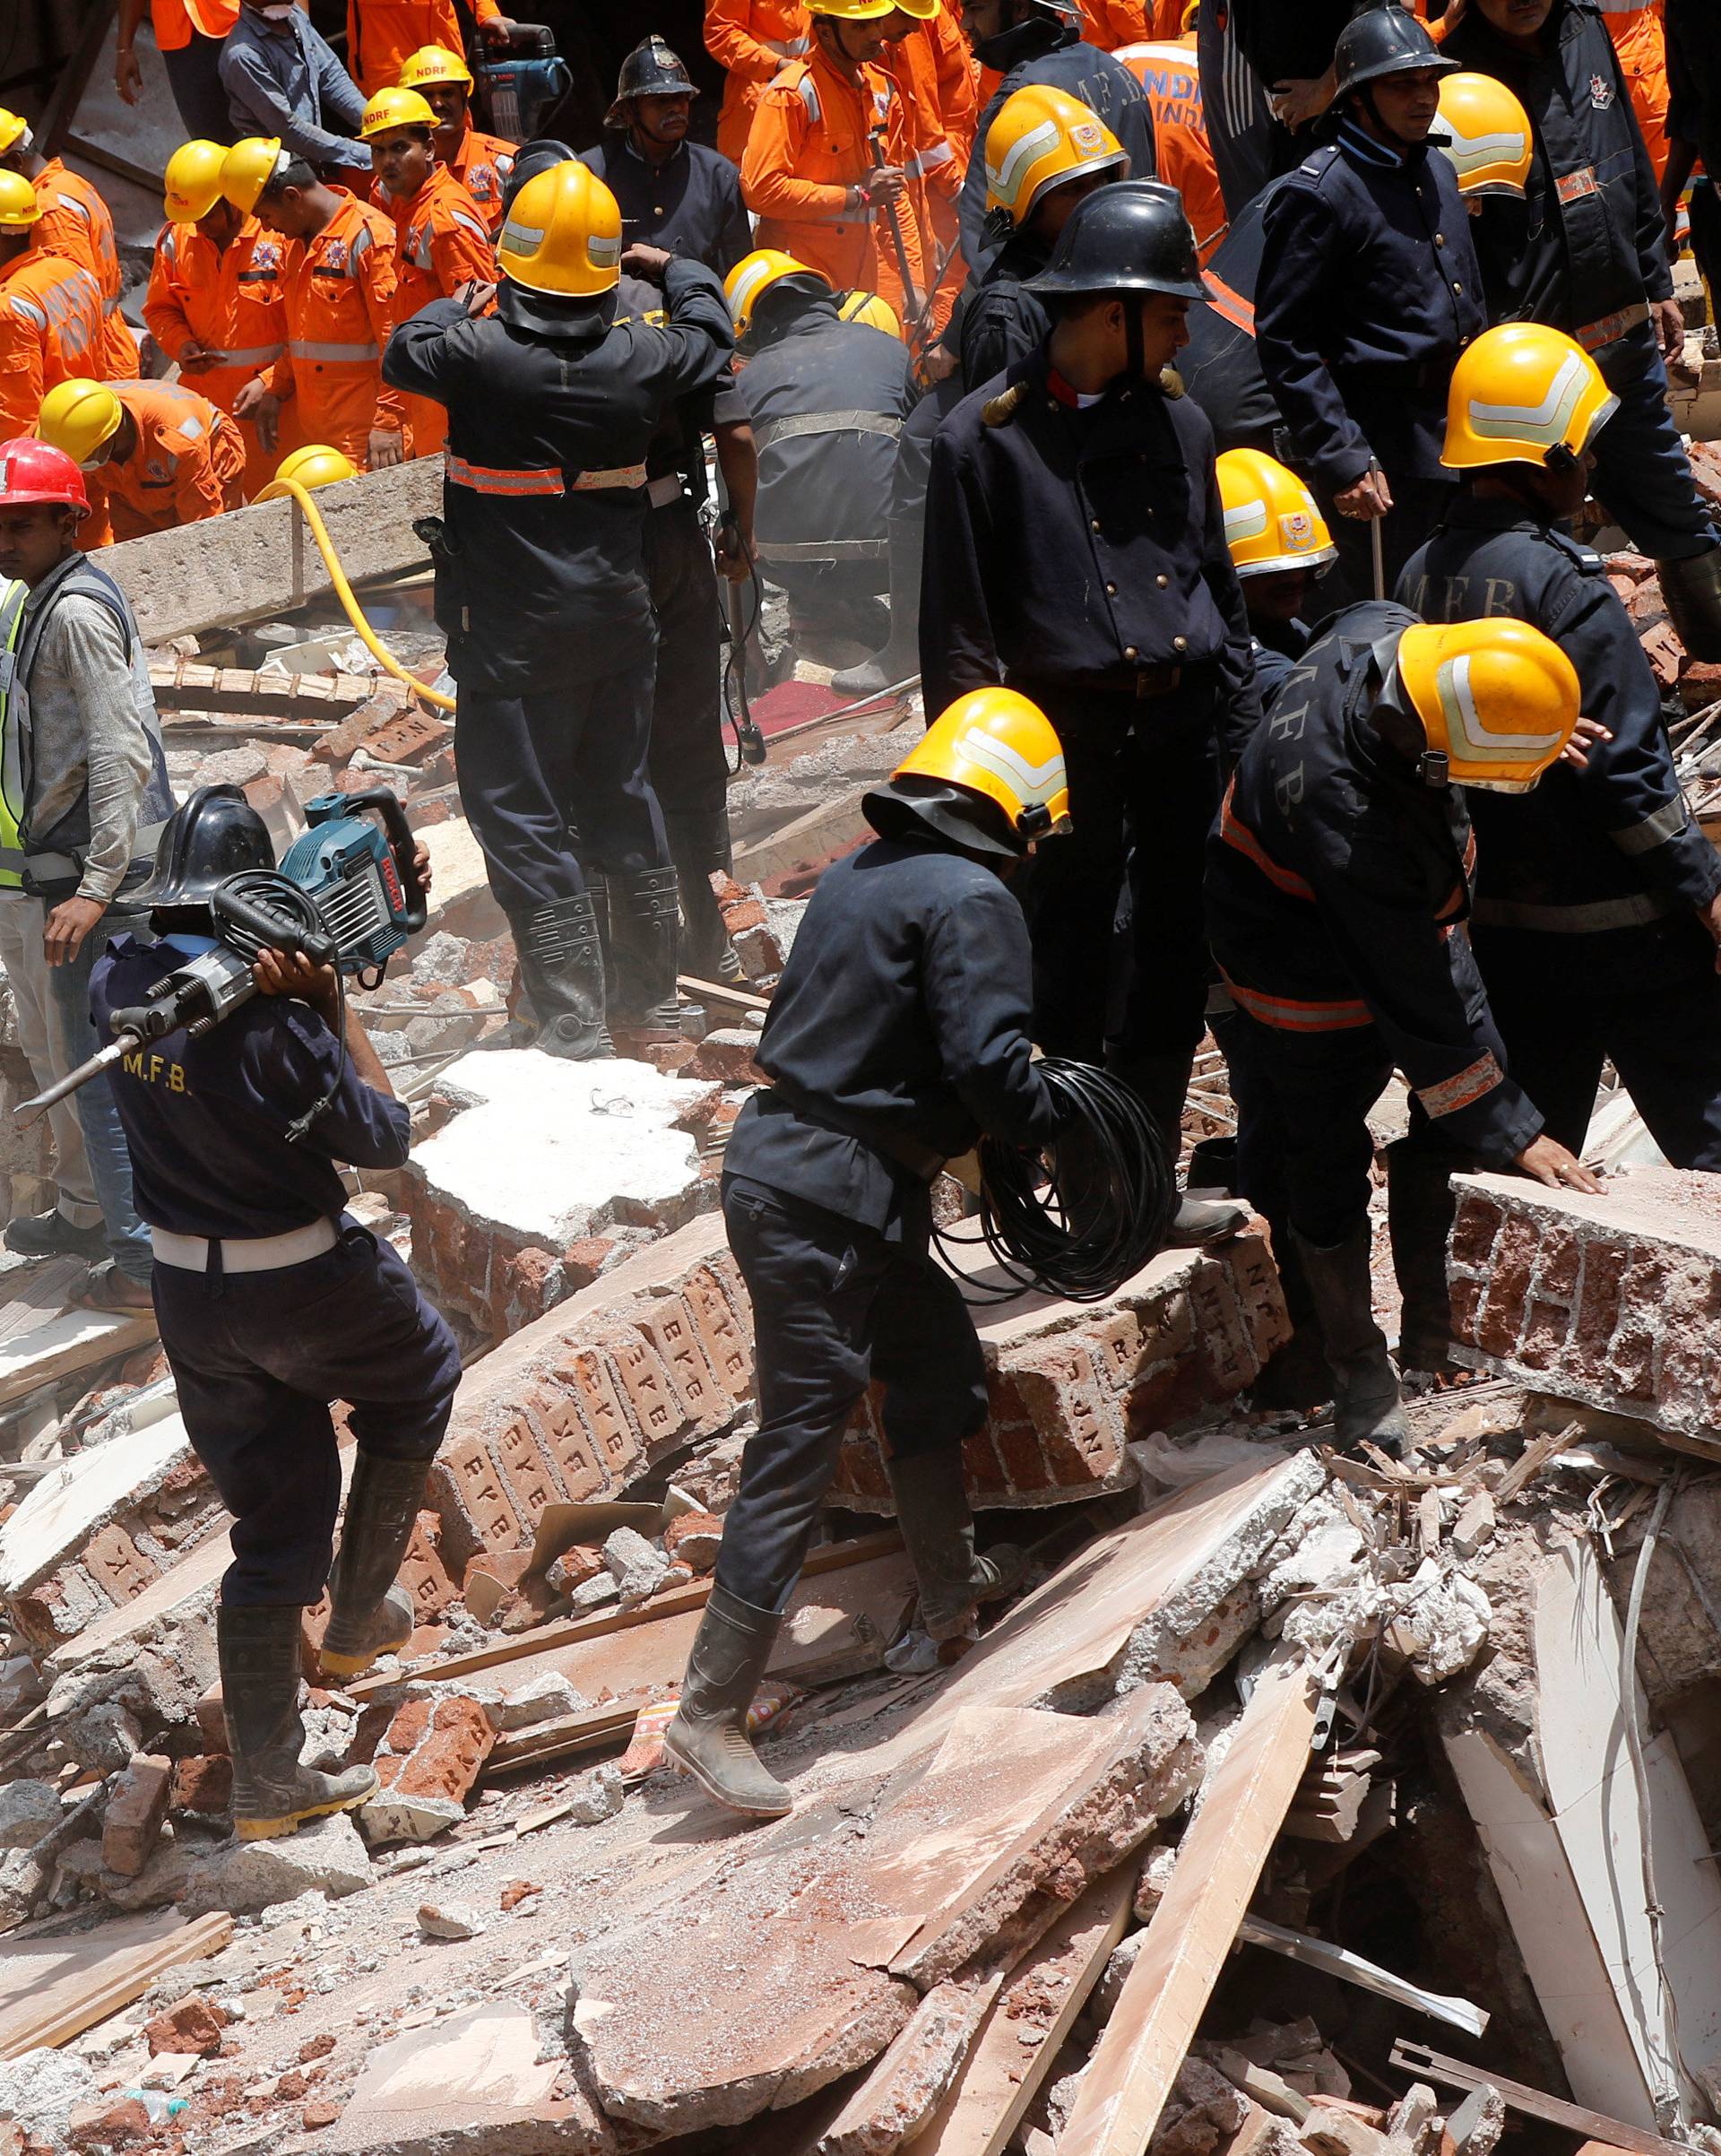 A firefighter arrives with a jack-hammer during a search for survivors at the site of a collapsed building in Mumbai